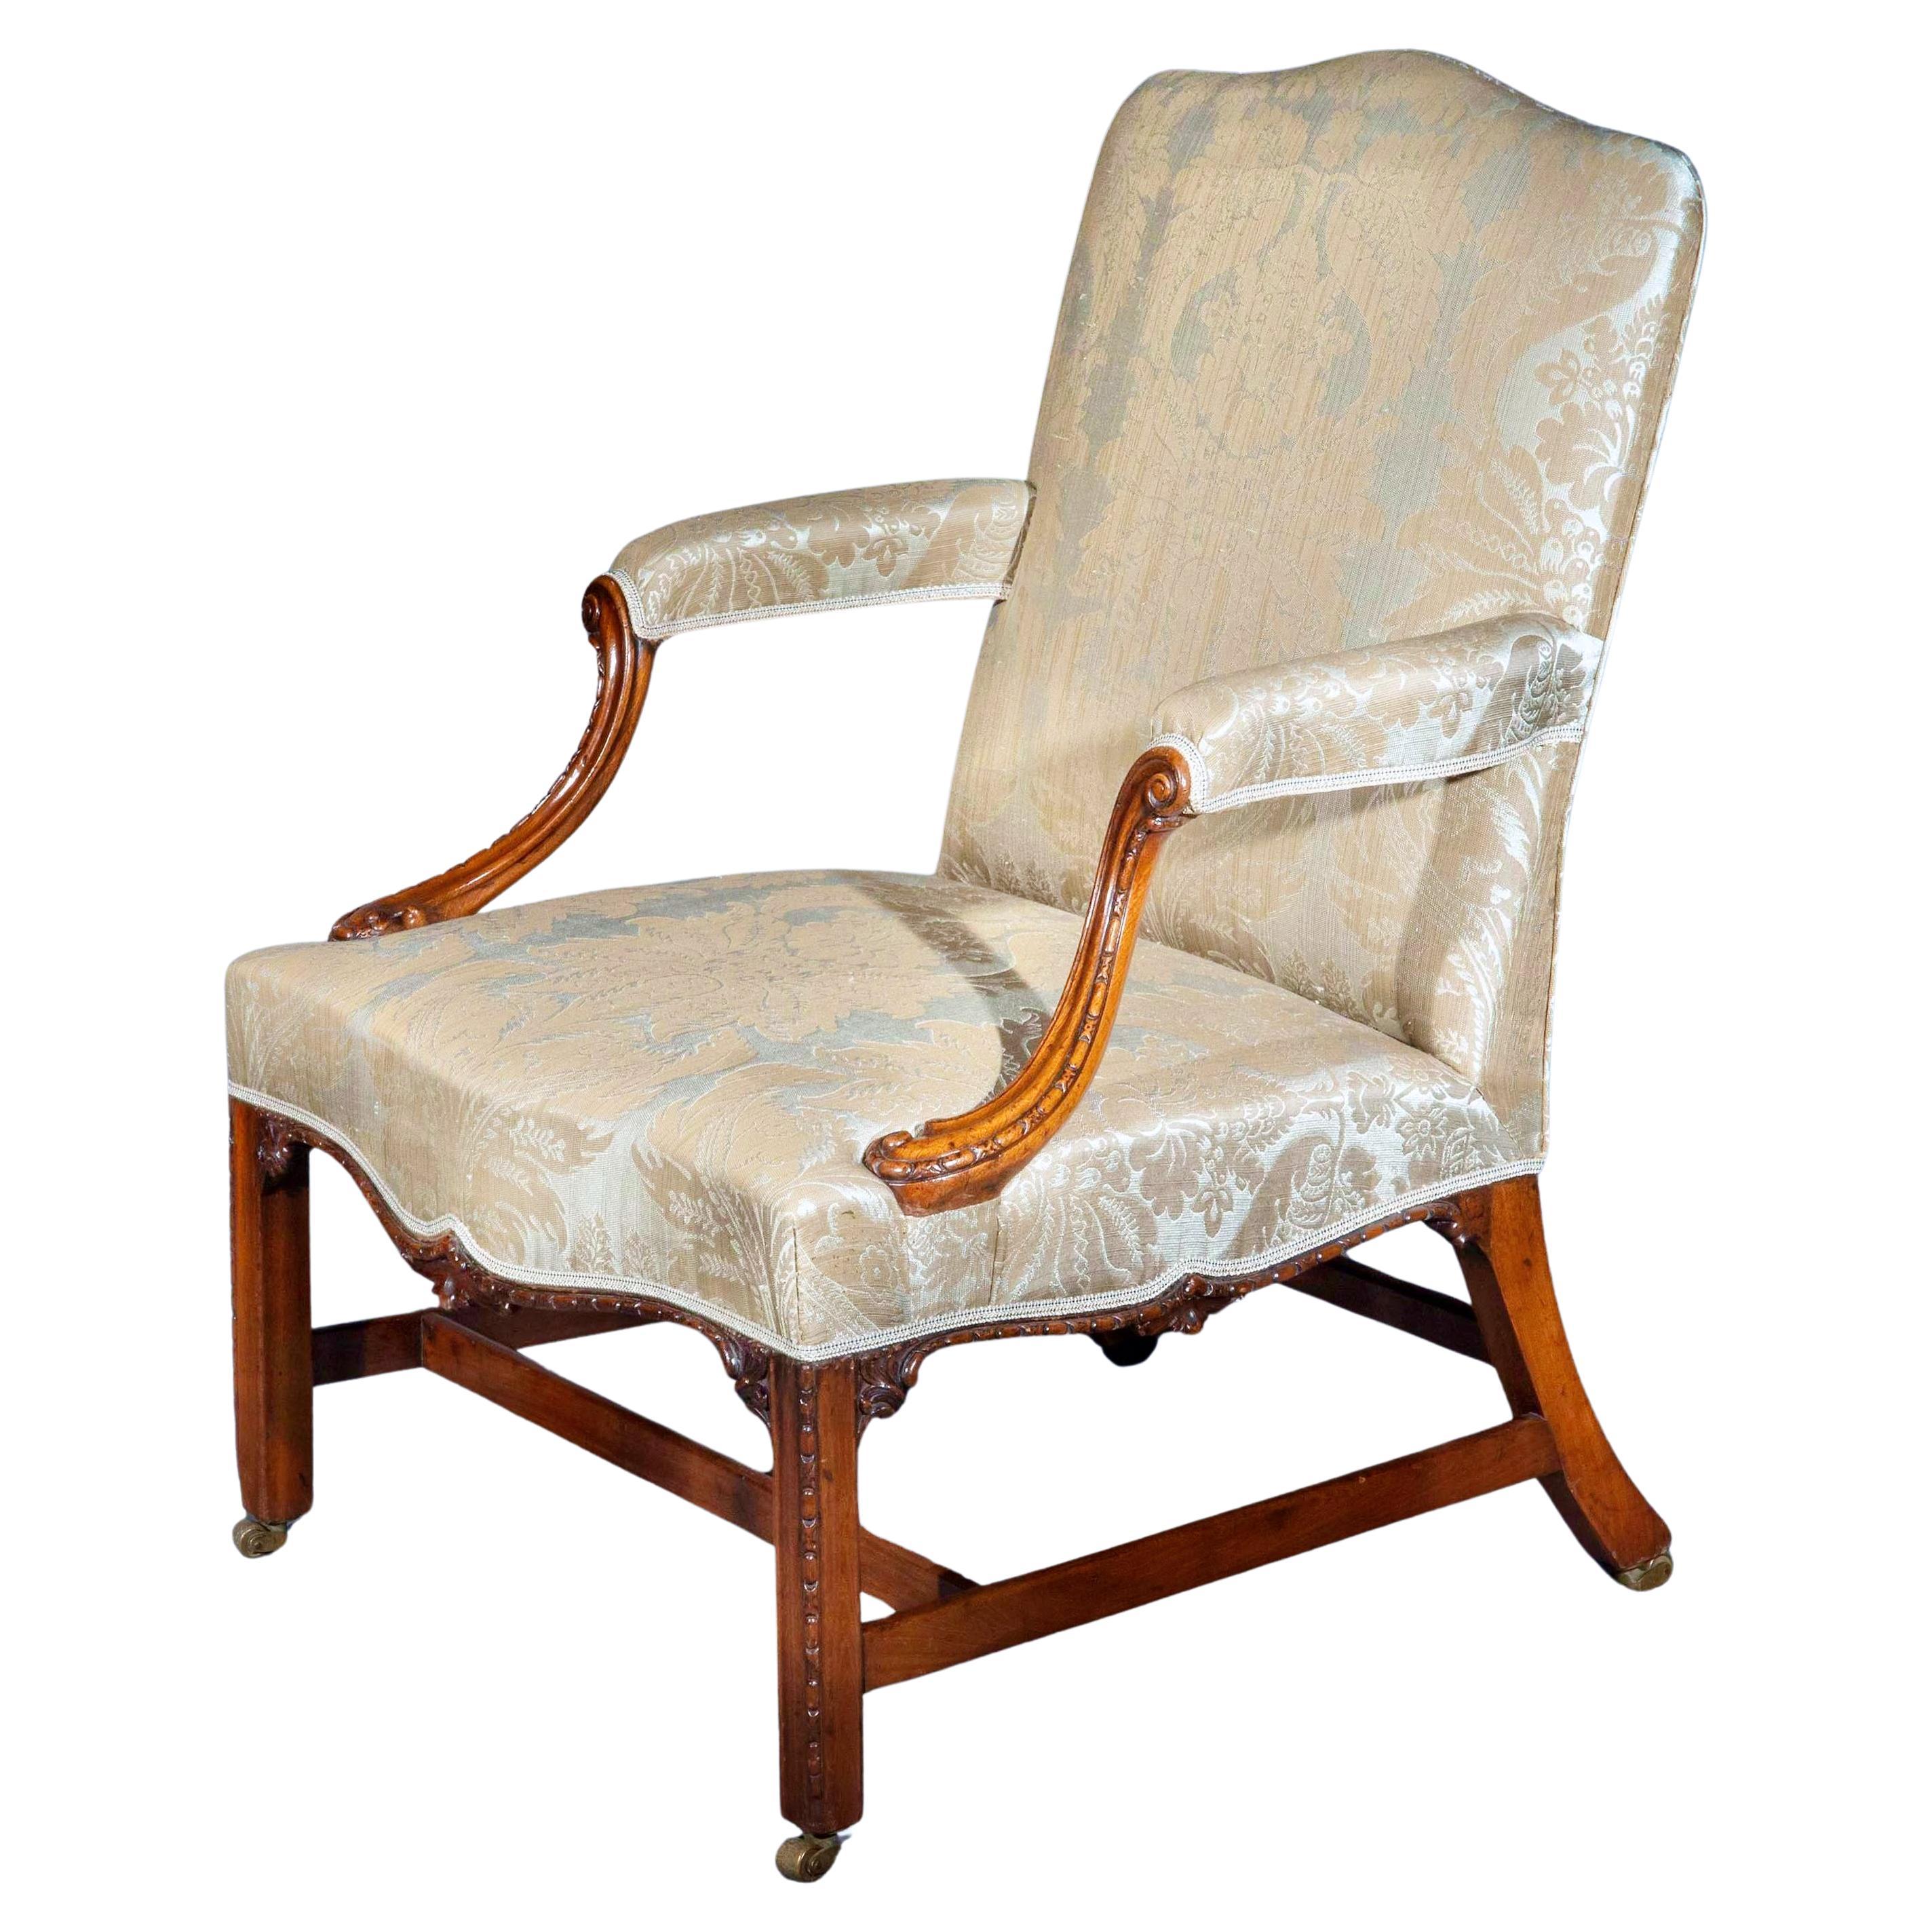 Large English Chippendale Gainsborough Armchair, mid-18th Century For Sale